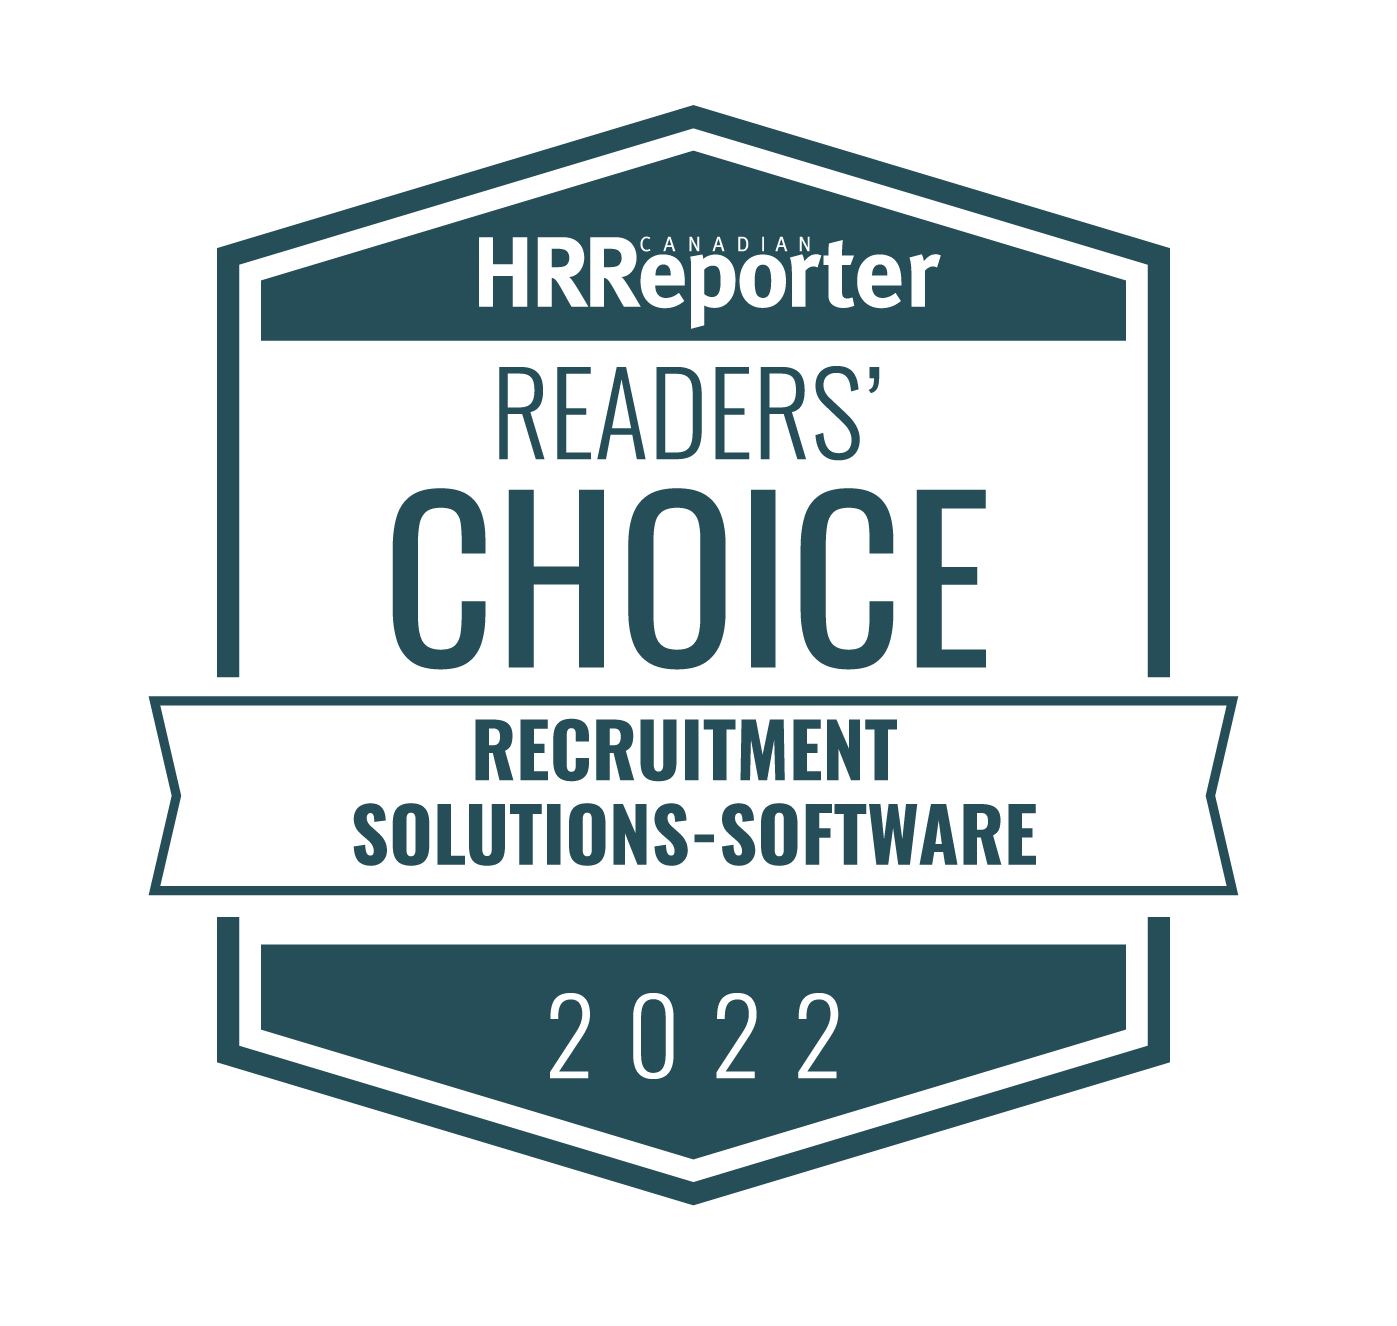 CHRR Readers Choice 2022 Recruitment Solutions/Software - 2022